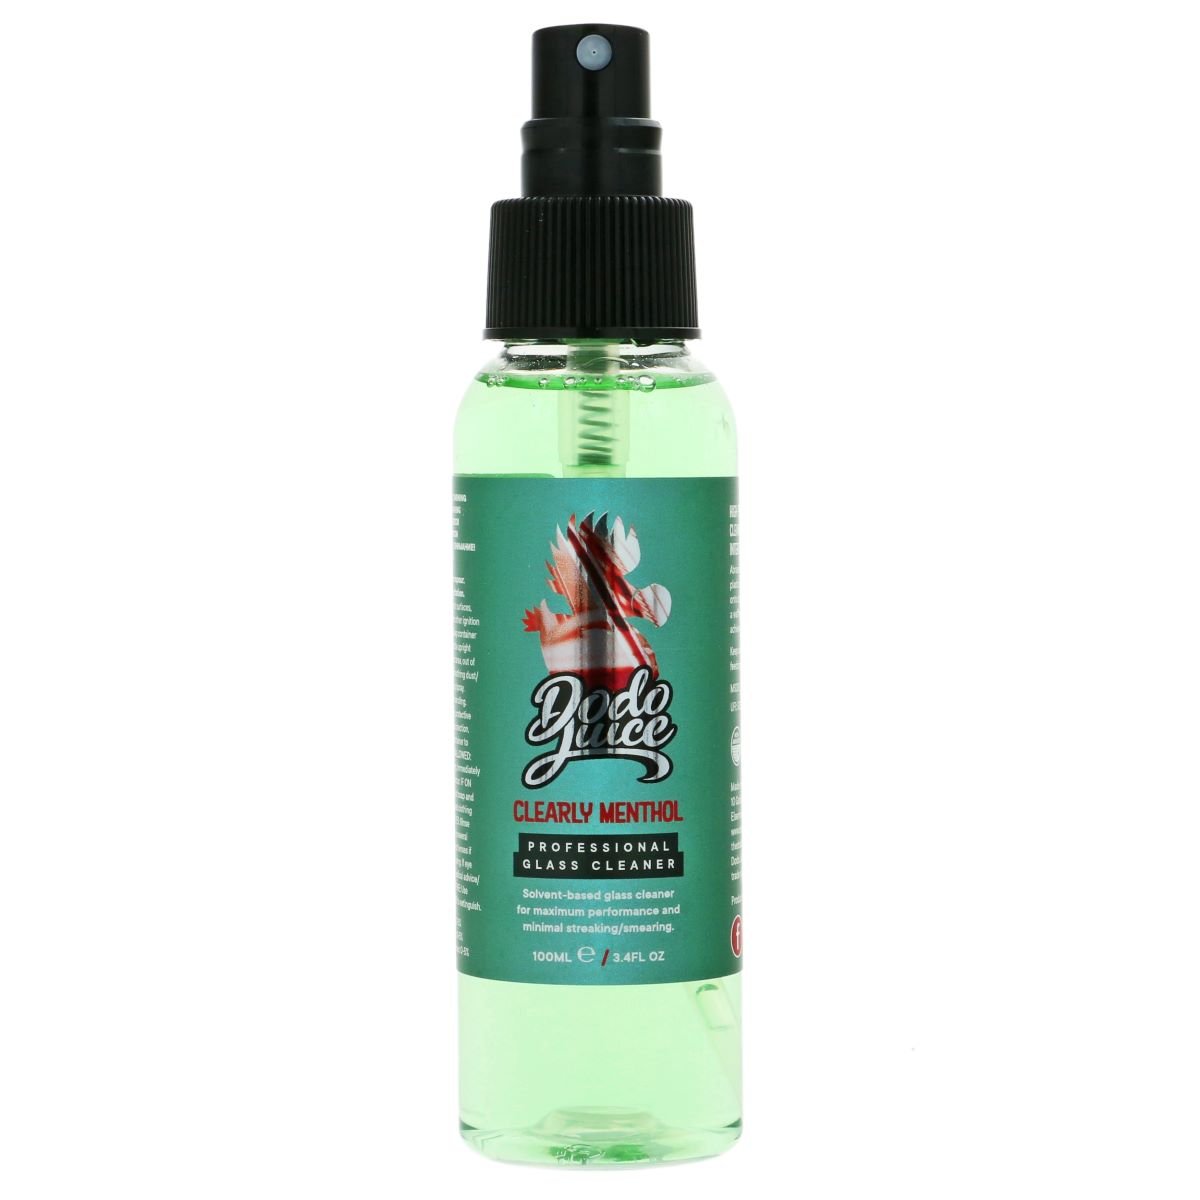 Clearly Menthol Professional Glass Cleaner - 100ml